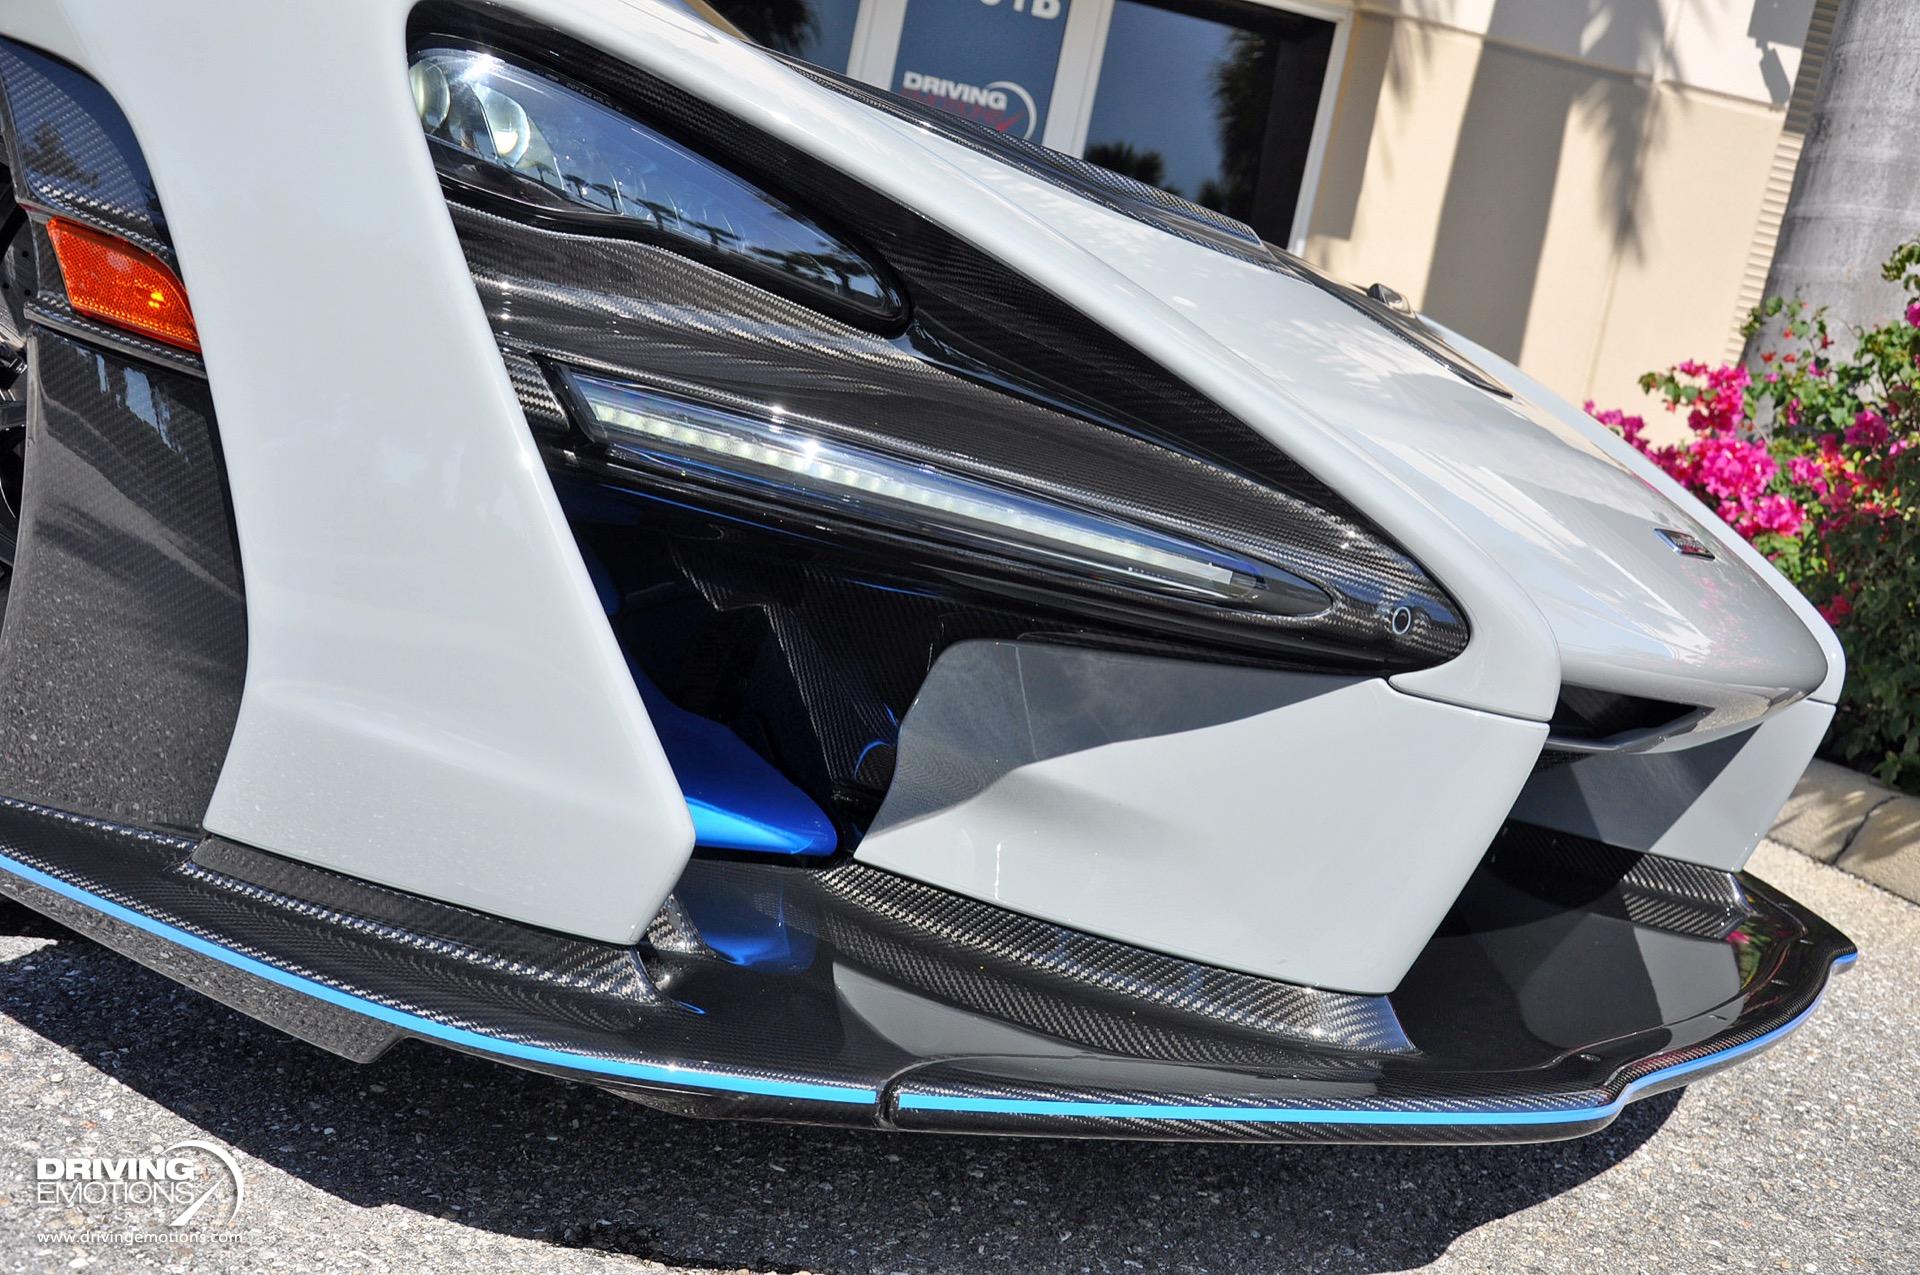 Used 2019 McLaren Senna 234 OF 500 BUILT! FRONT LIFT! LOW MILES! COLLECTOR!! | Lake Park, FL